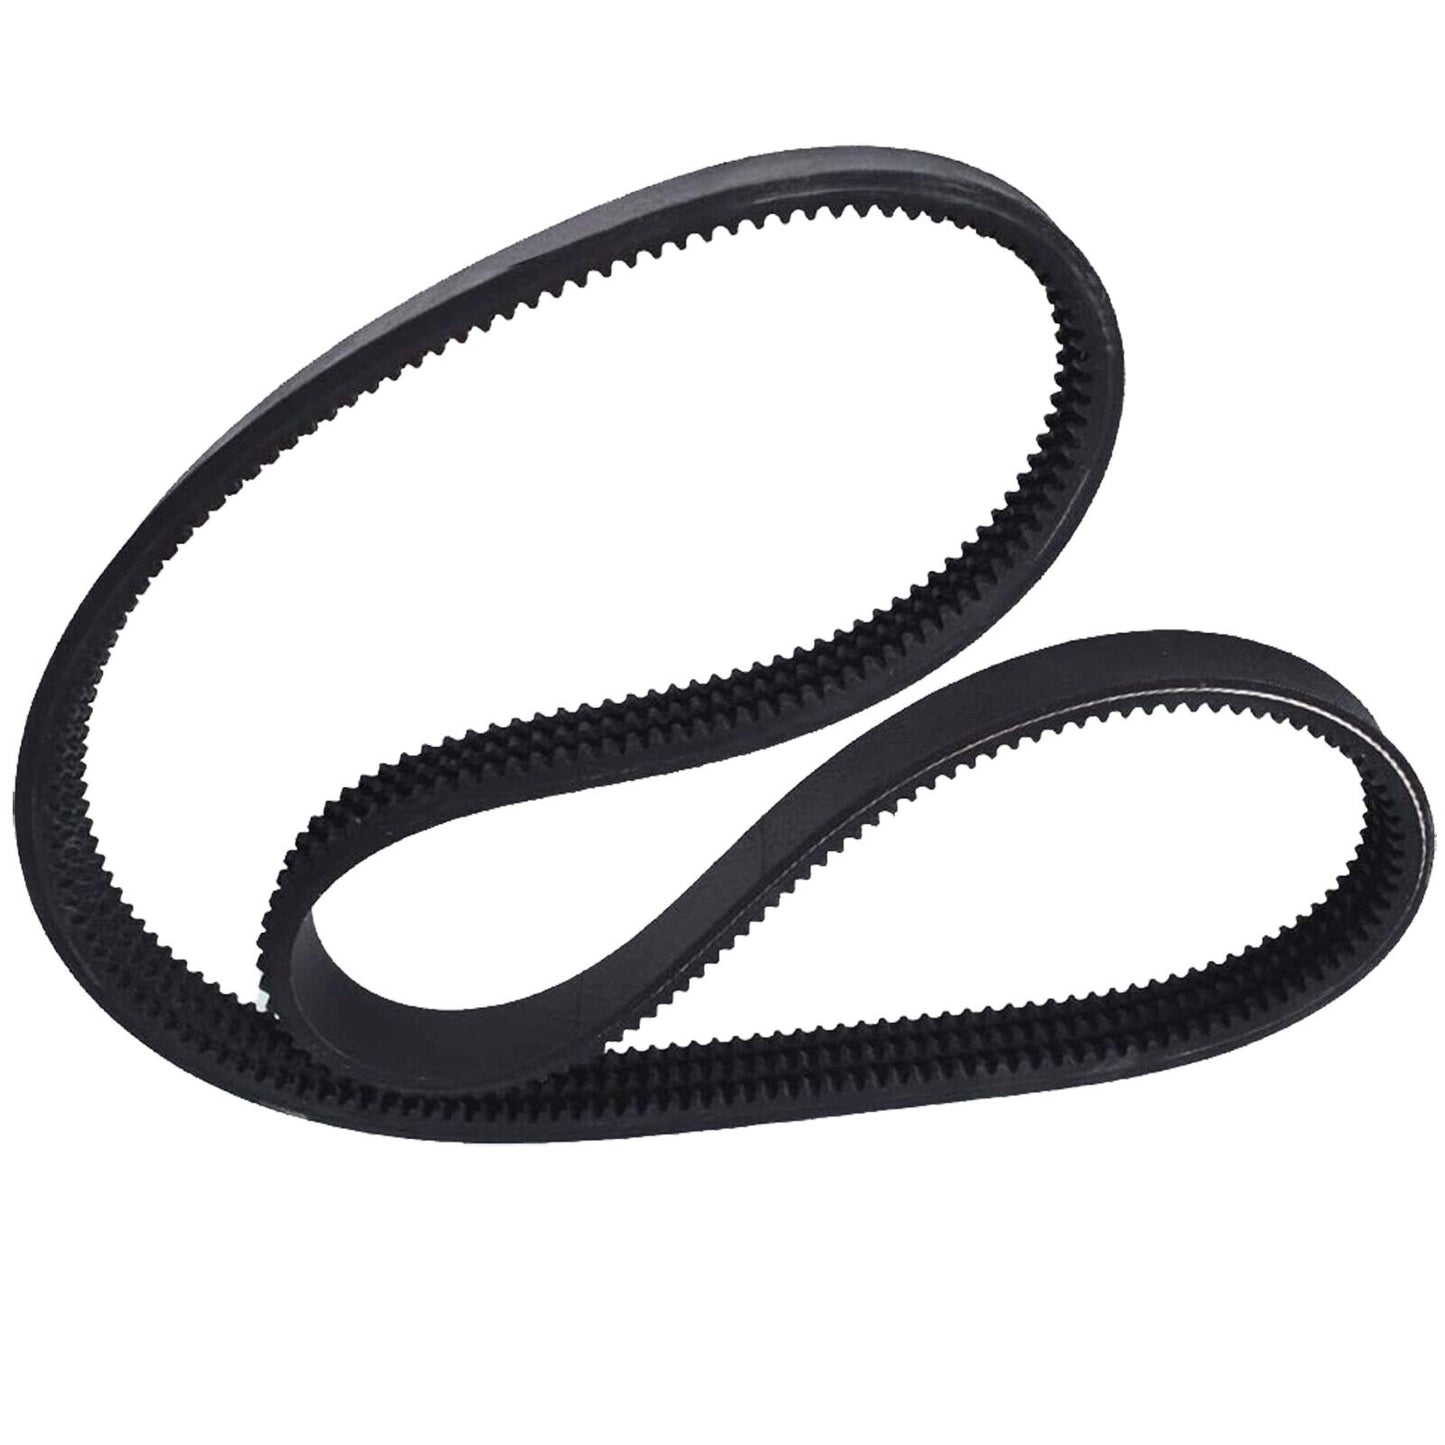 6736775 Drive Belt Compatible with Bobcat Loaders 753 S130 S150 S160 S175 S185 S205 T140